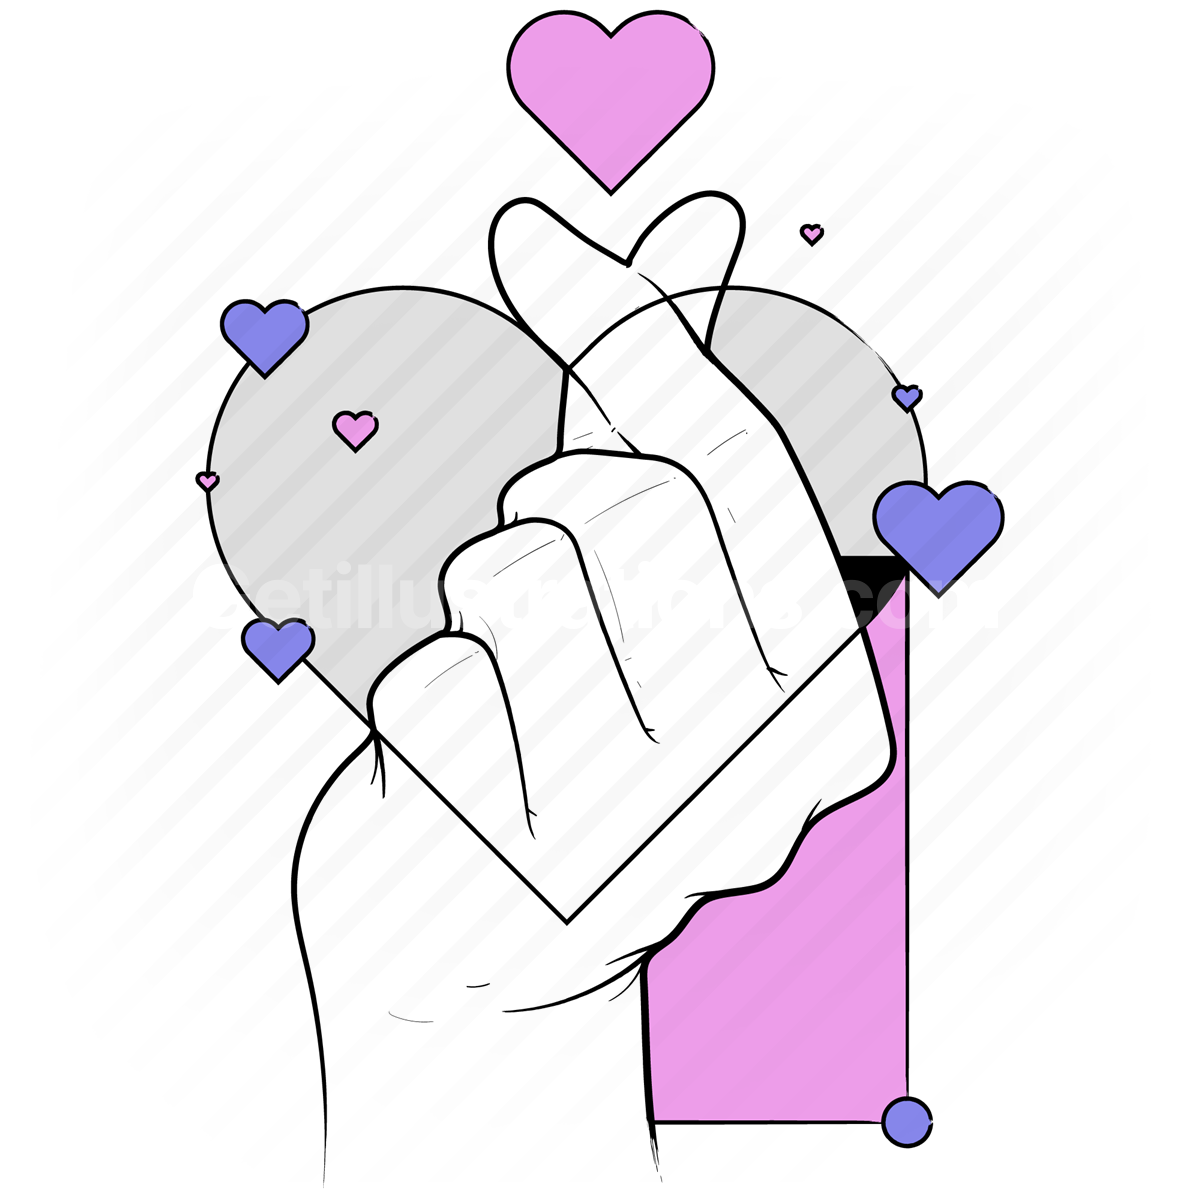 I Love You Sign Language stock vector. Illustration of diversity - 59097331